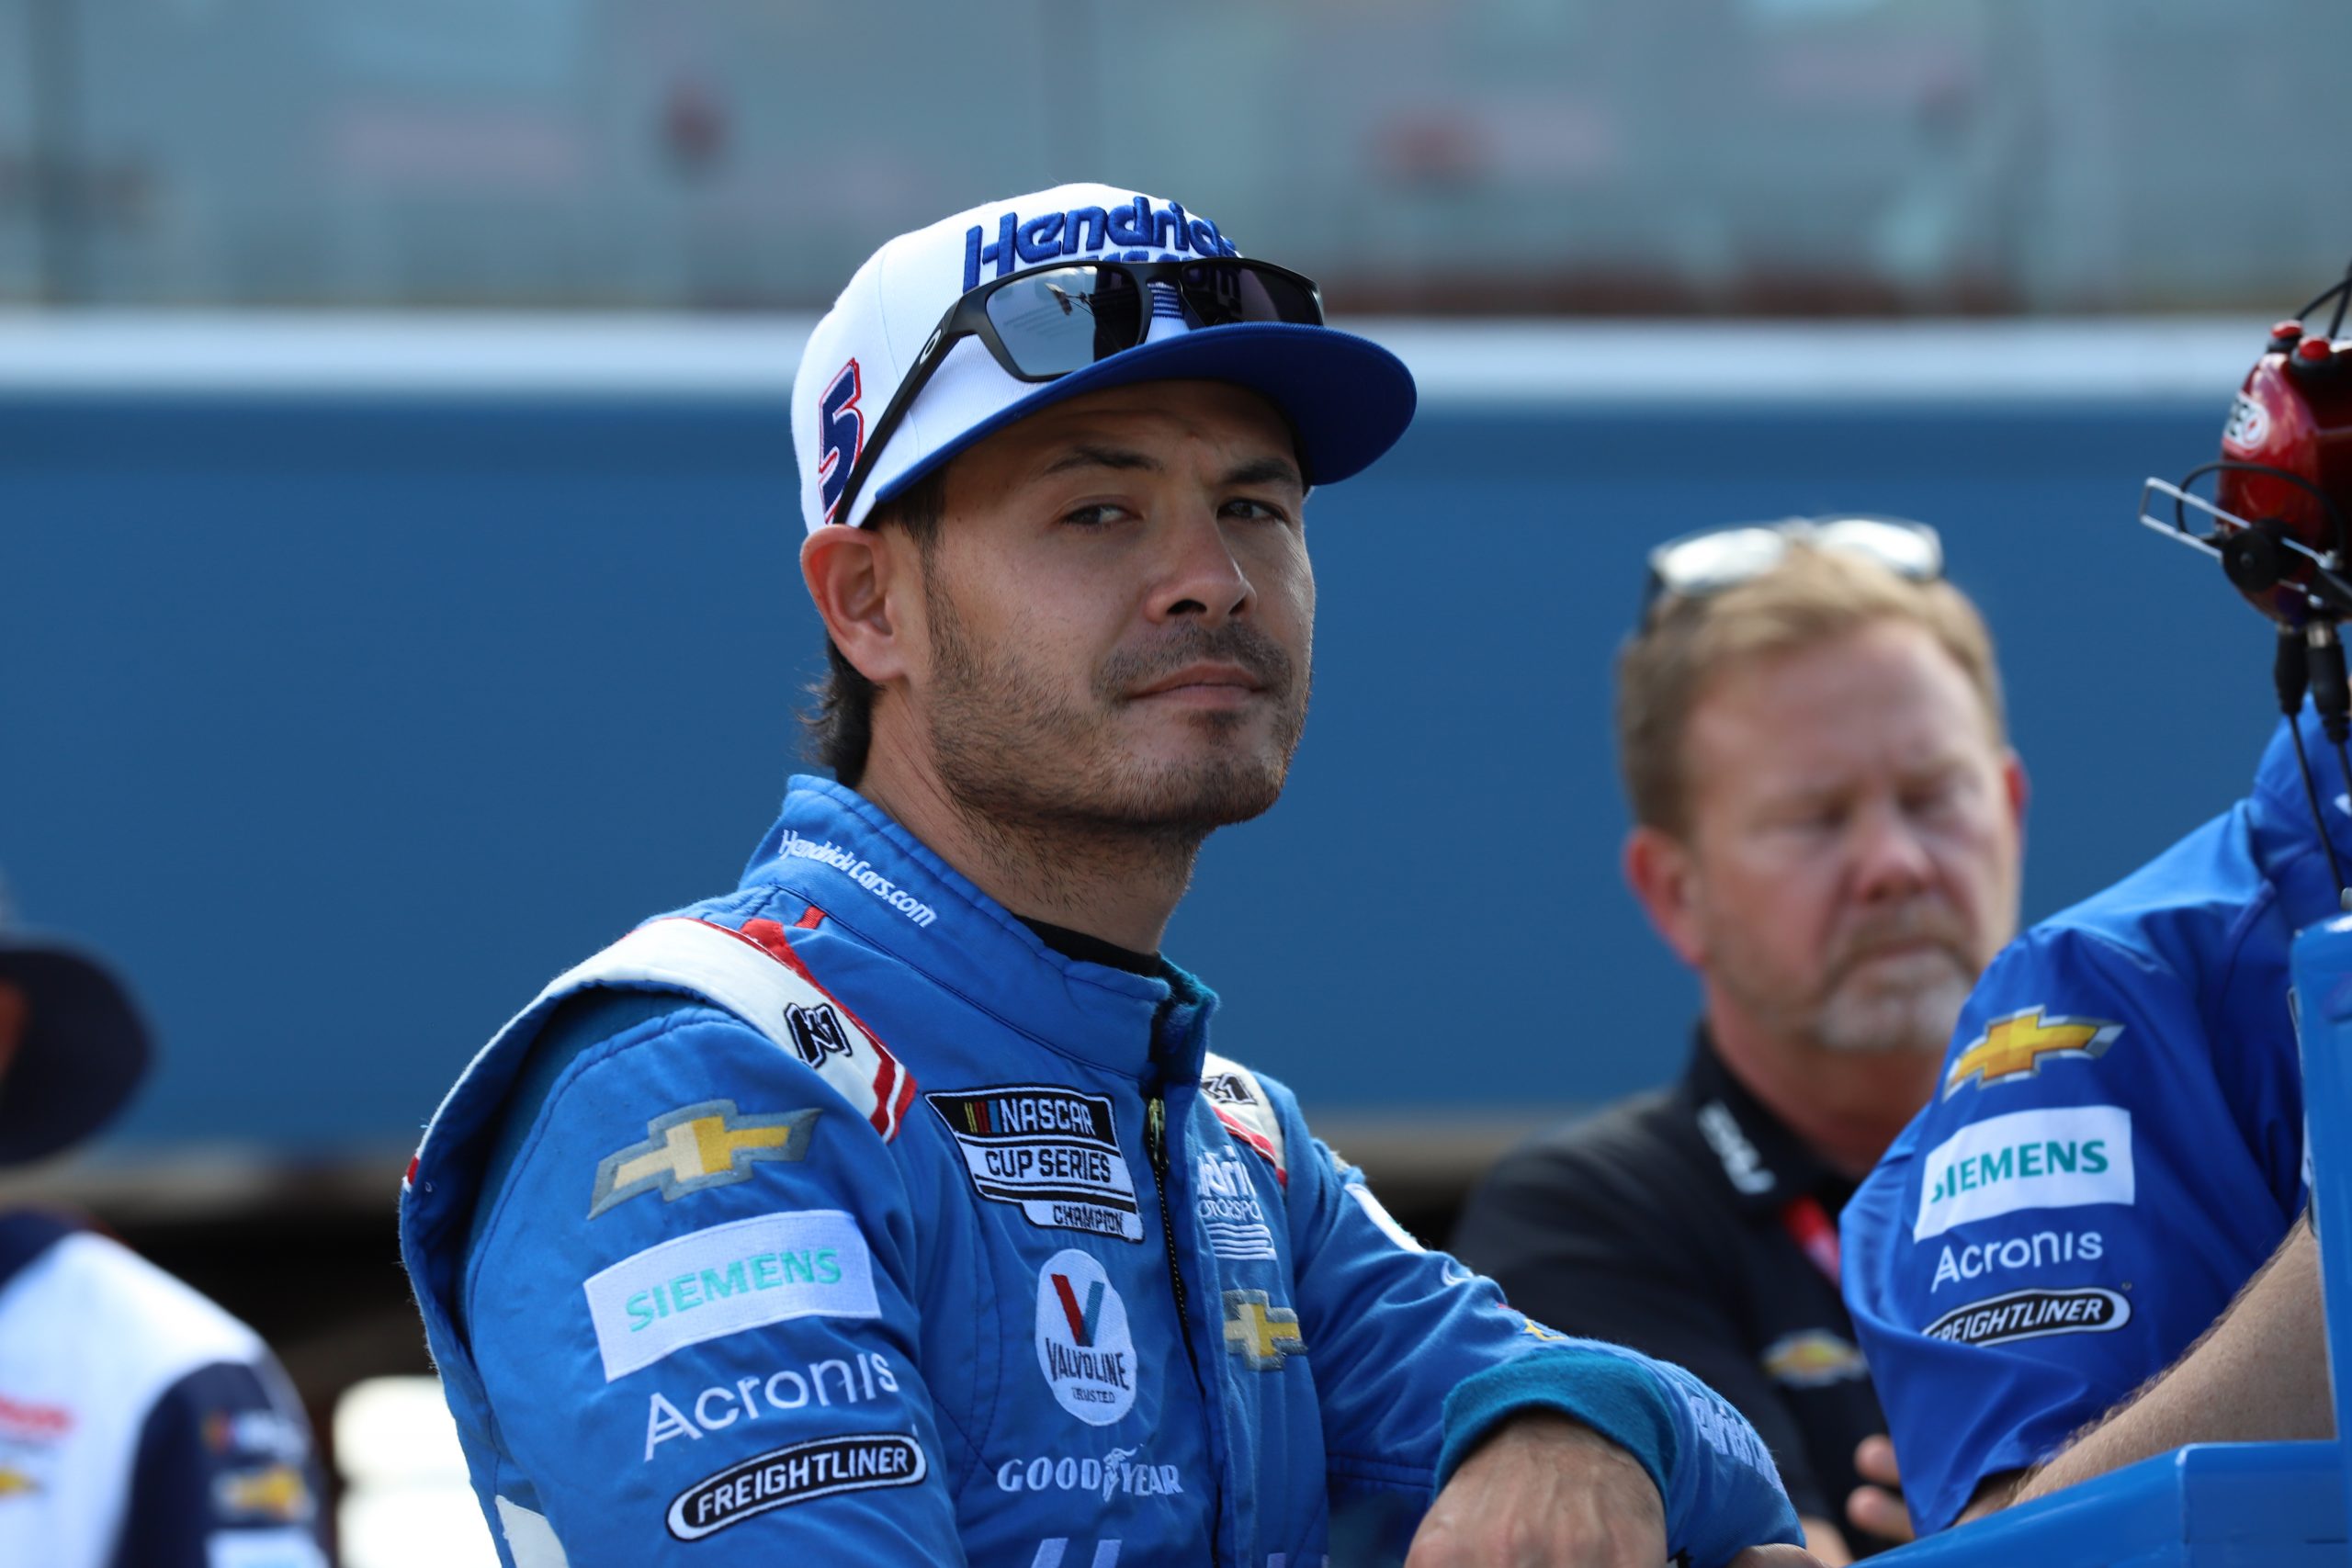 "It's just a tough sport." - Larson on Cup racing. (Photo: Dylan Nadwodny | The Podium Finish)